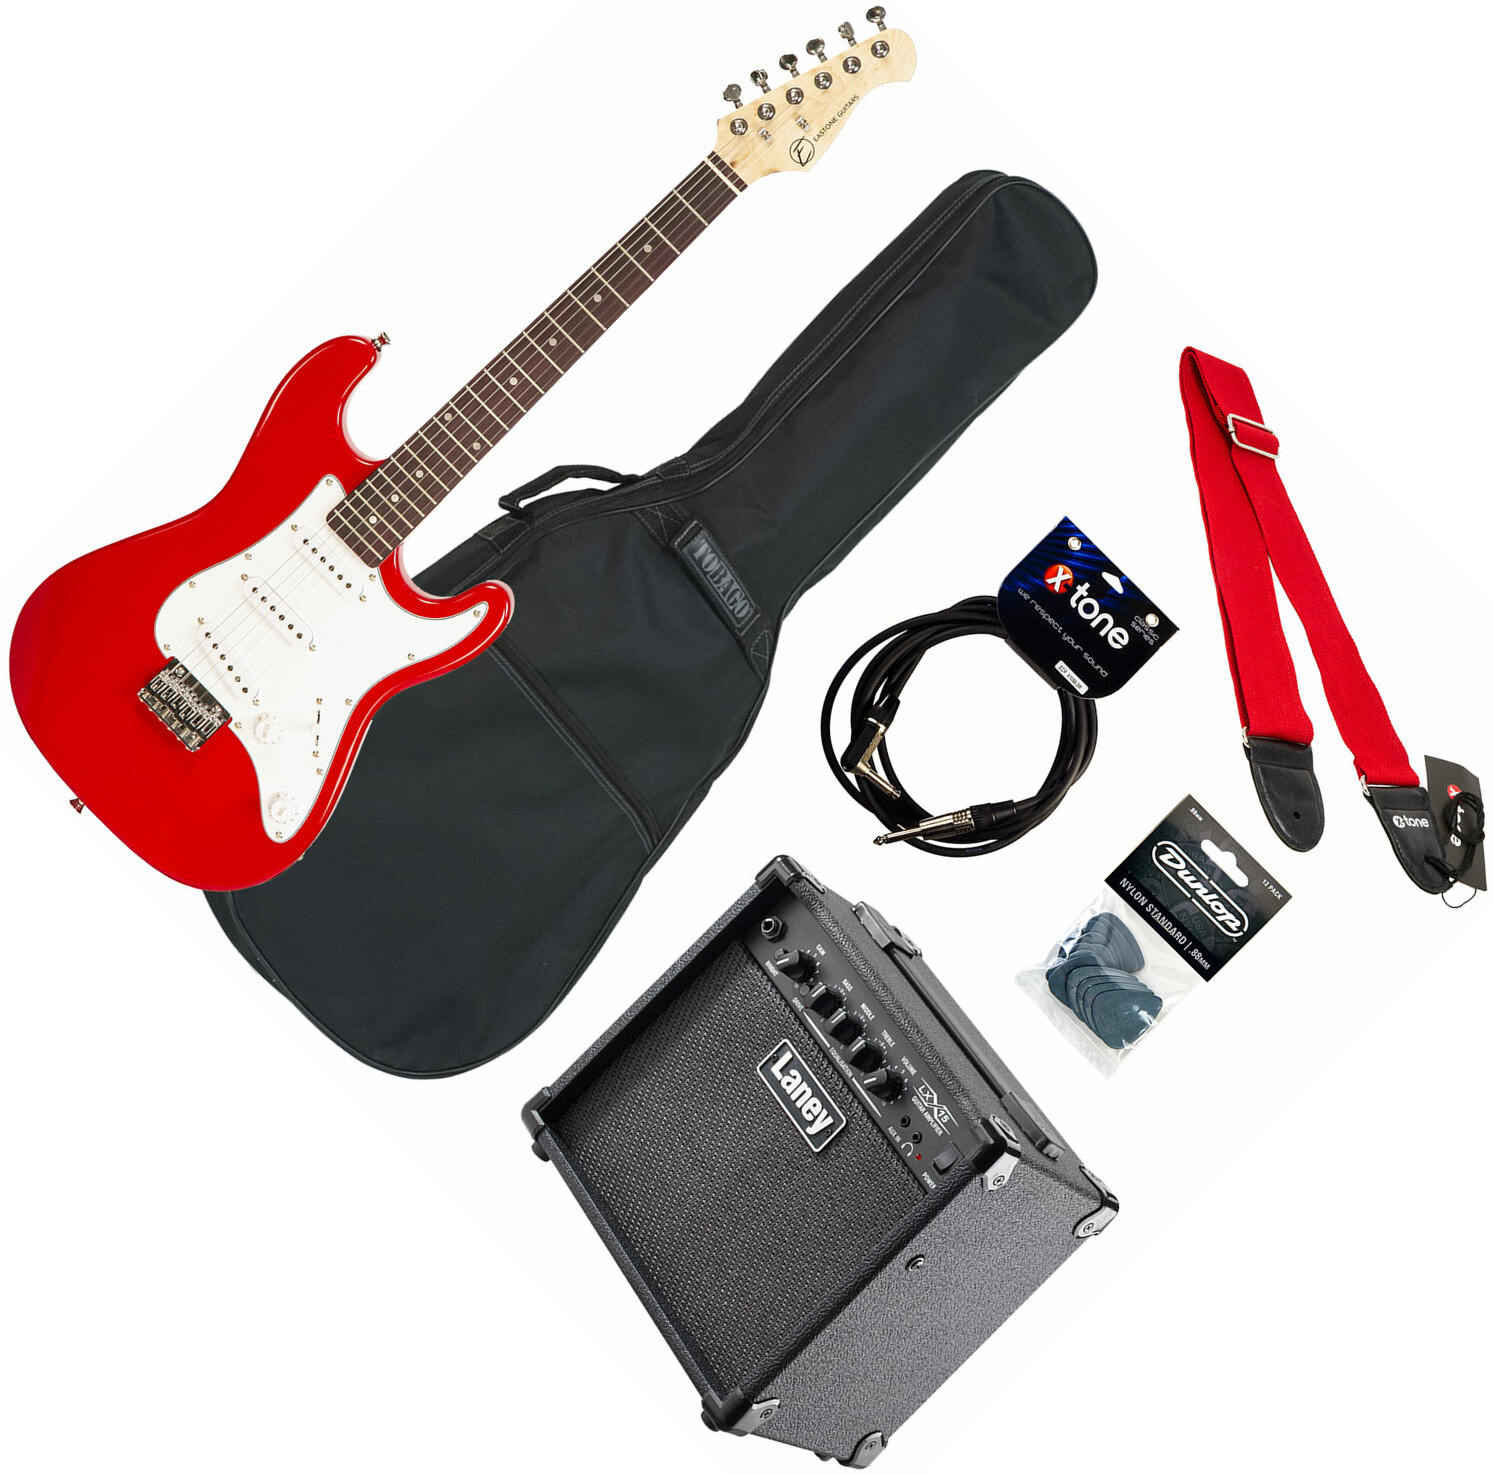 STR MINI +MARSHALL MG10 +CABLE +HOUSSE +COURROIE +MEDIATORS - red